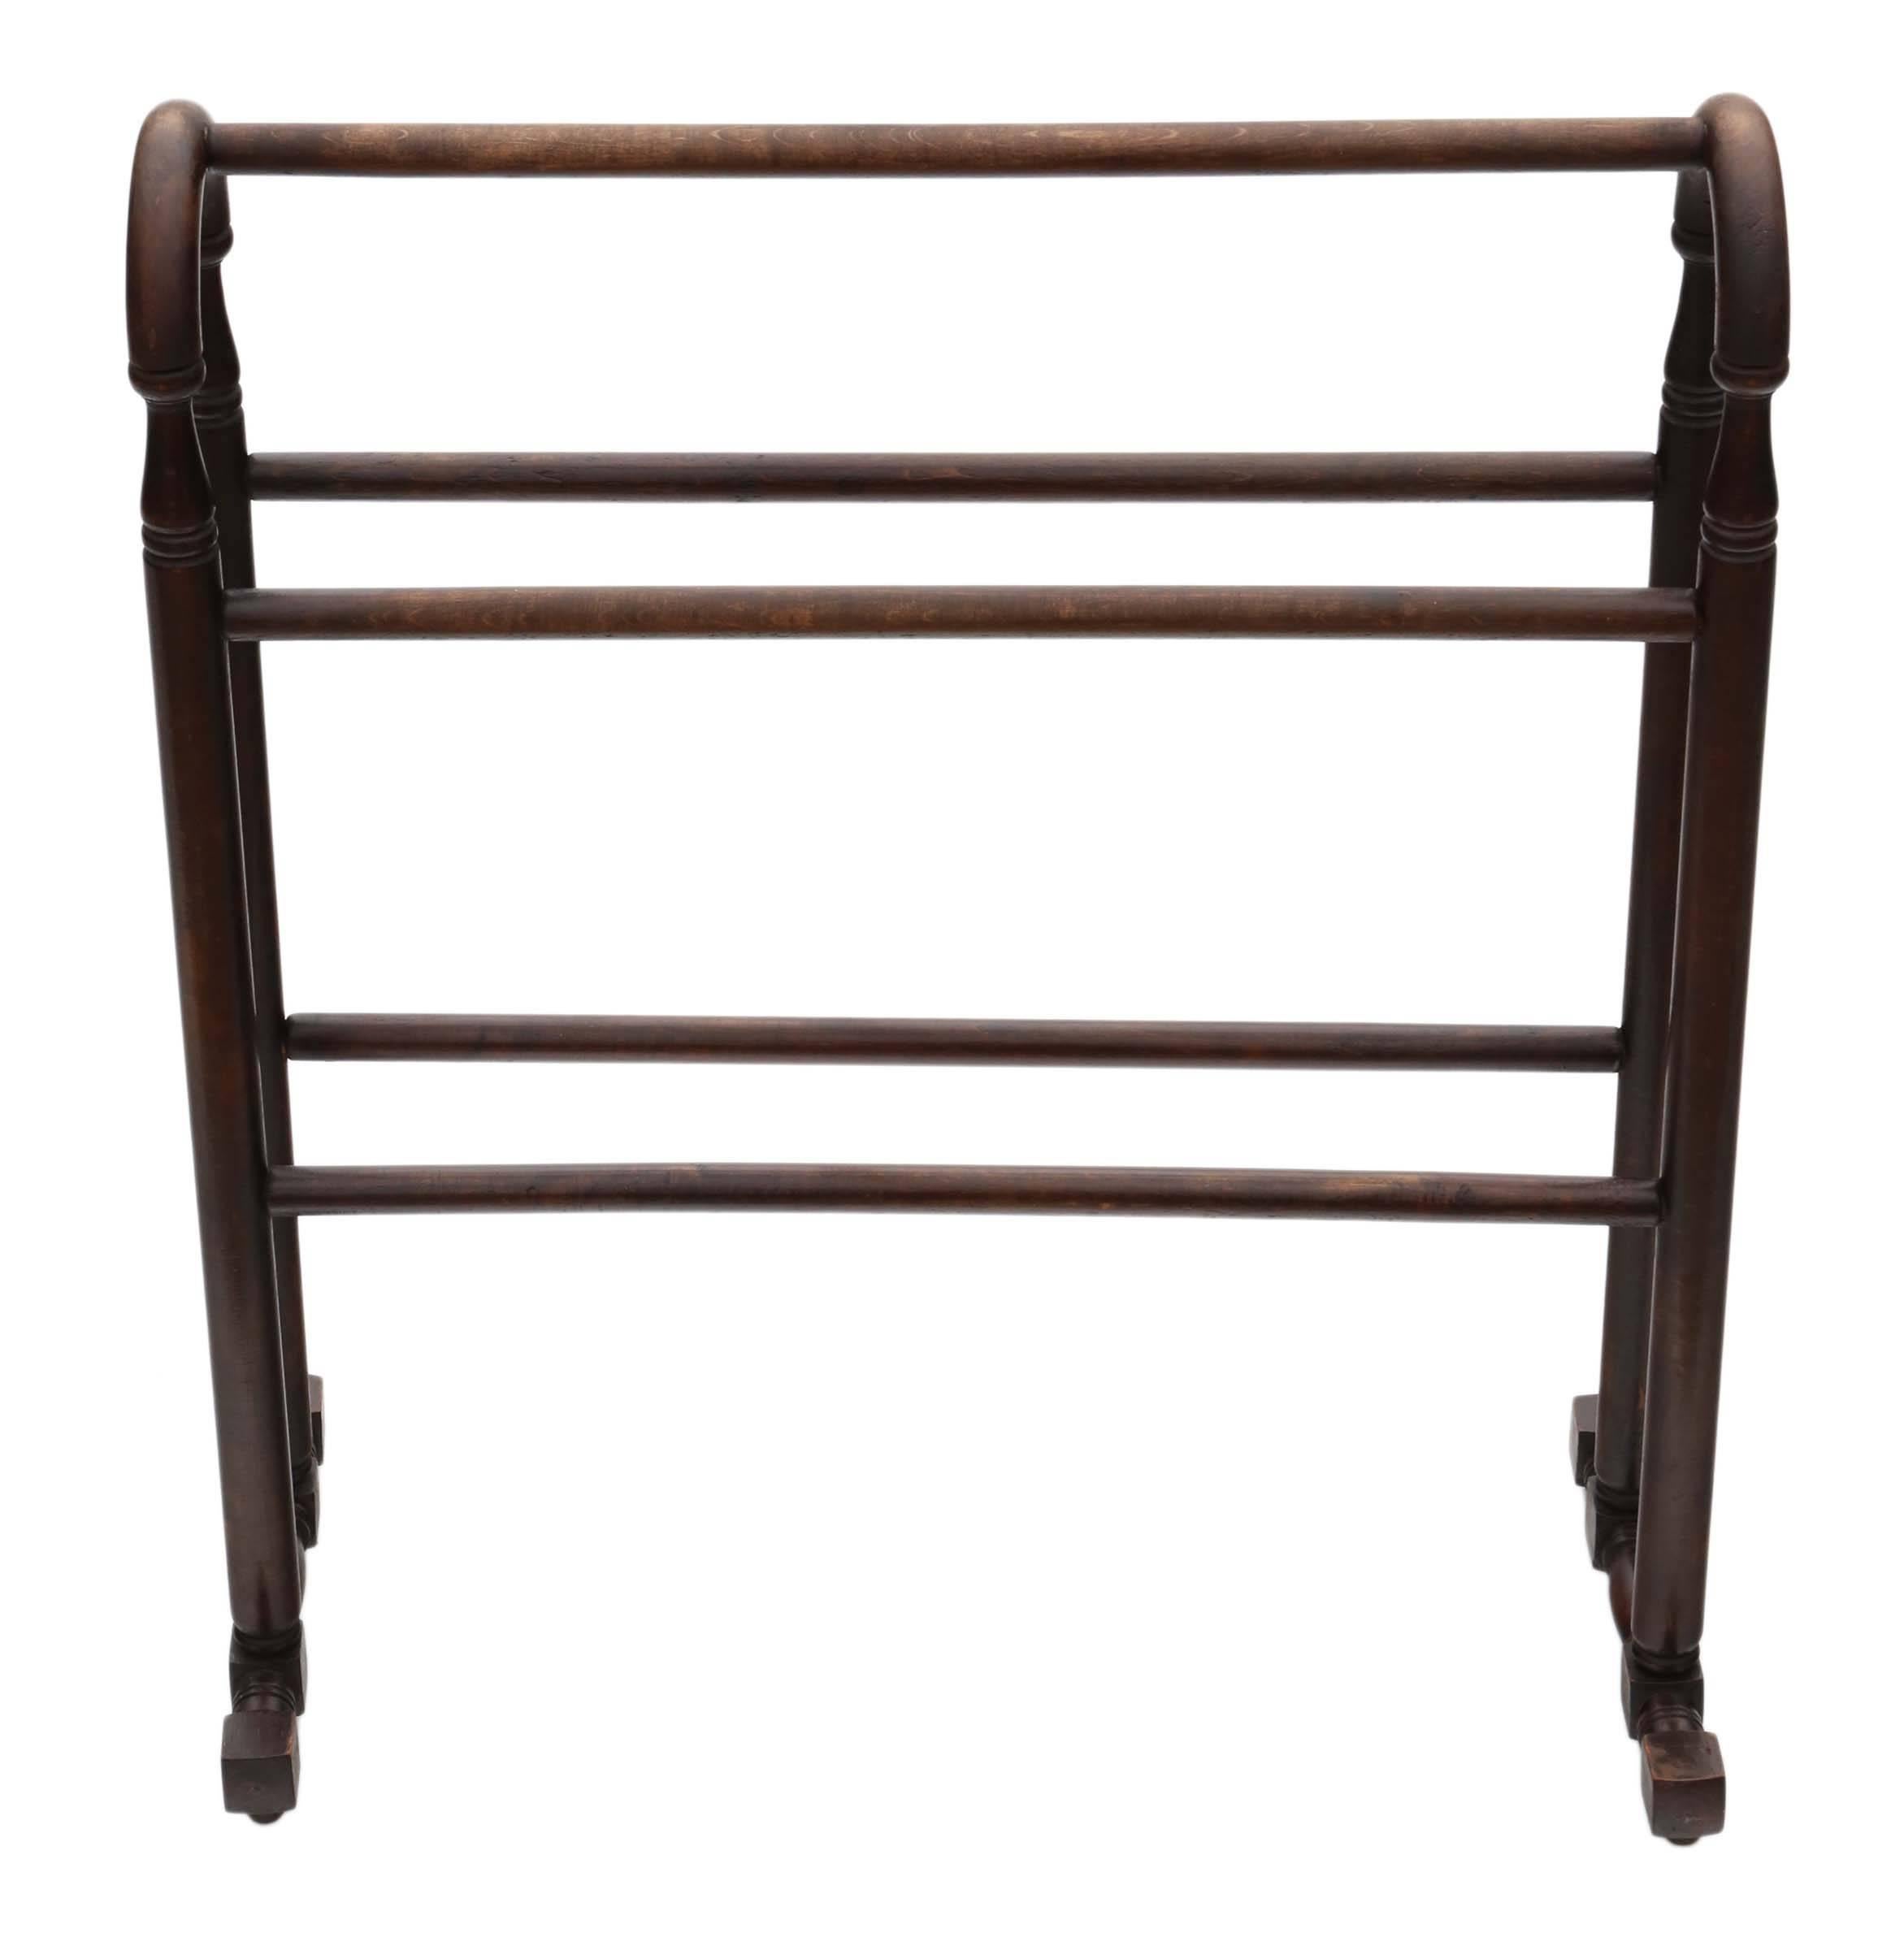 Antique quality Victorian circa 1900 beech towel rail stand.

This item is solid and strong, with no loose joints.

No woodworm.

Good age and patina, would look amazing in the right location!

Overall maximum dimensions:

66cm W x 30cm D